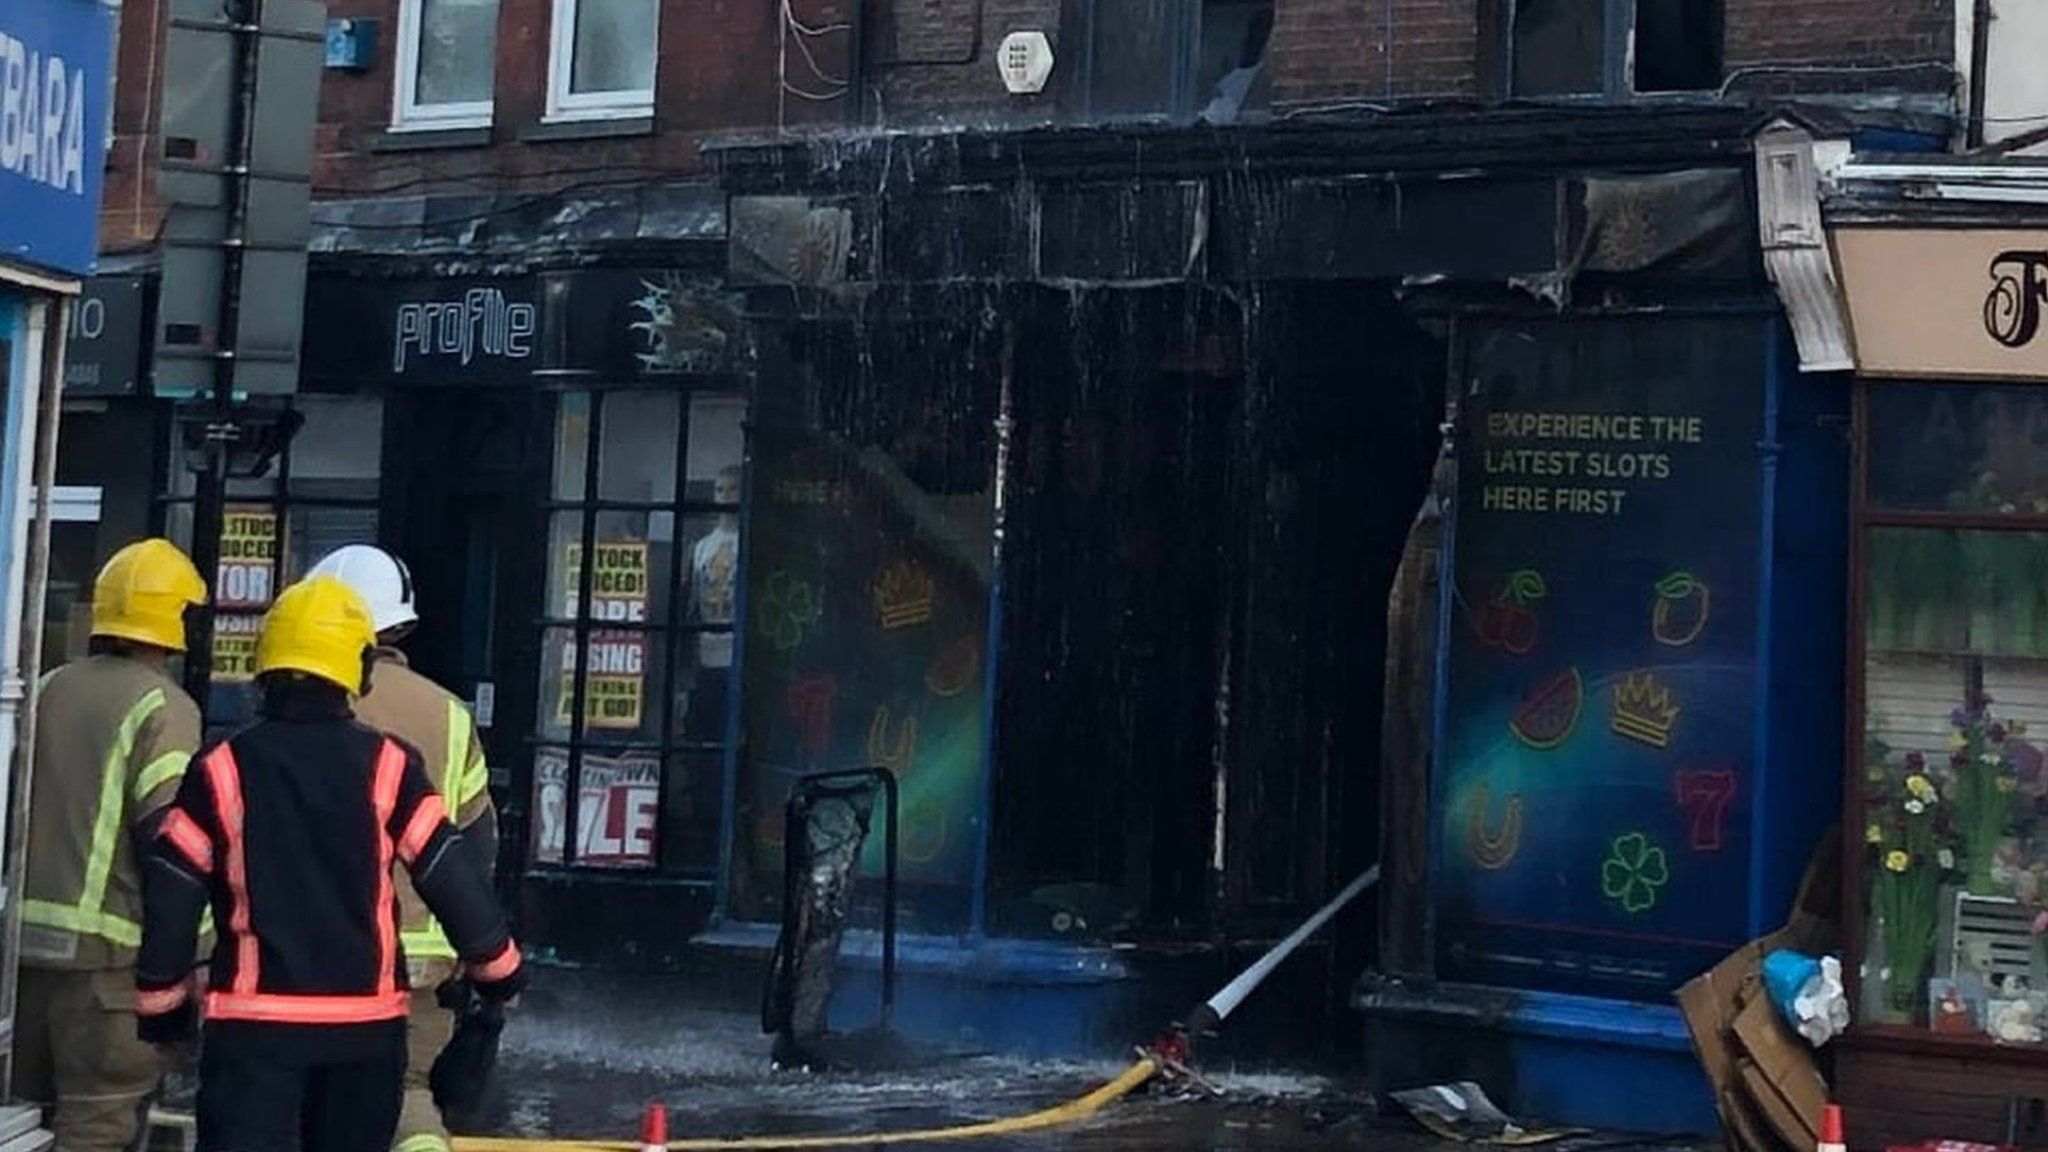 Building destroyed by fire in Wisbech, Cambridgeshire